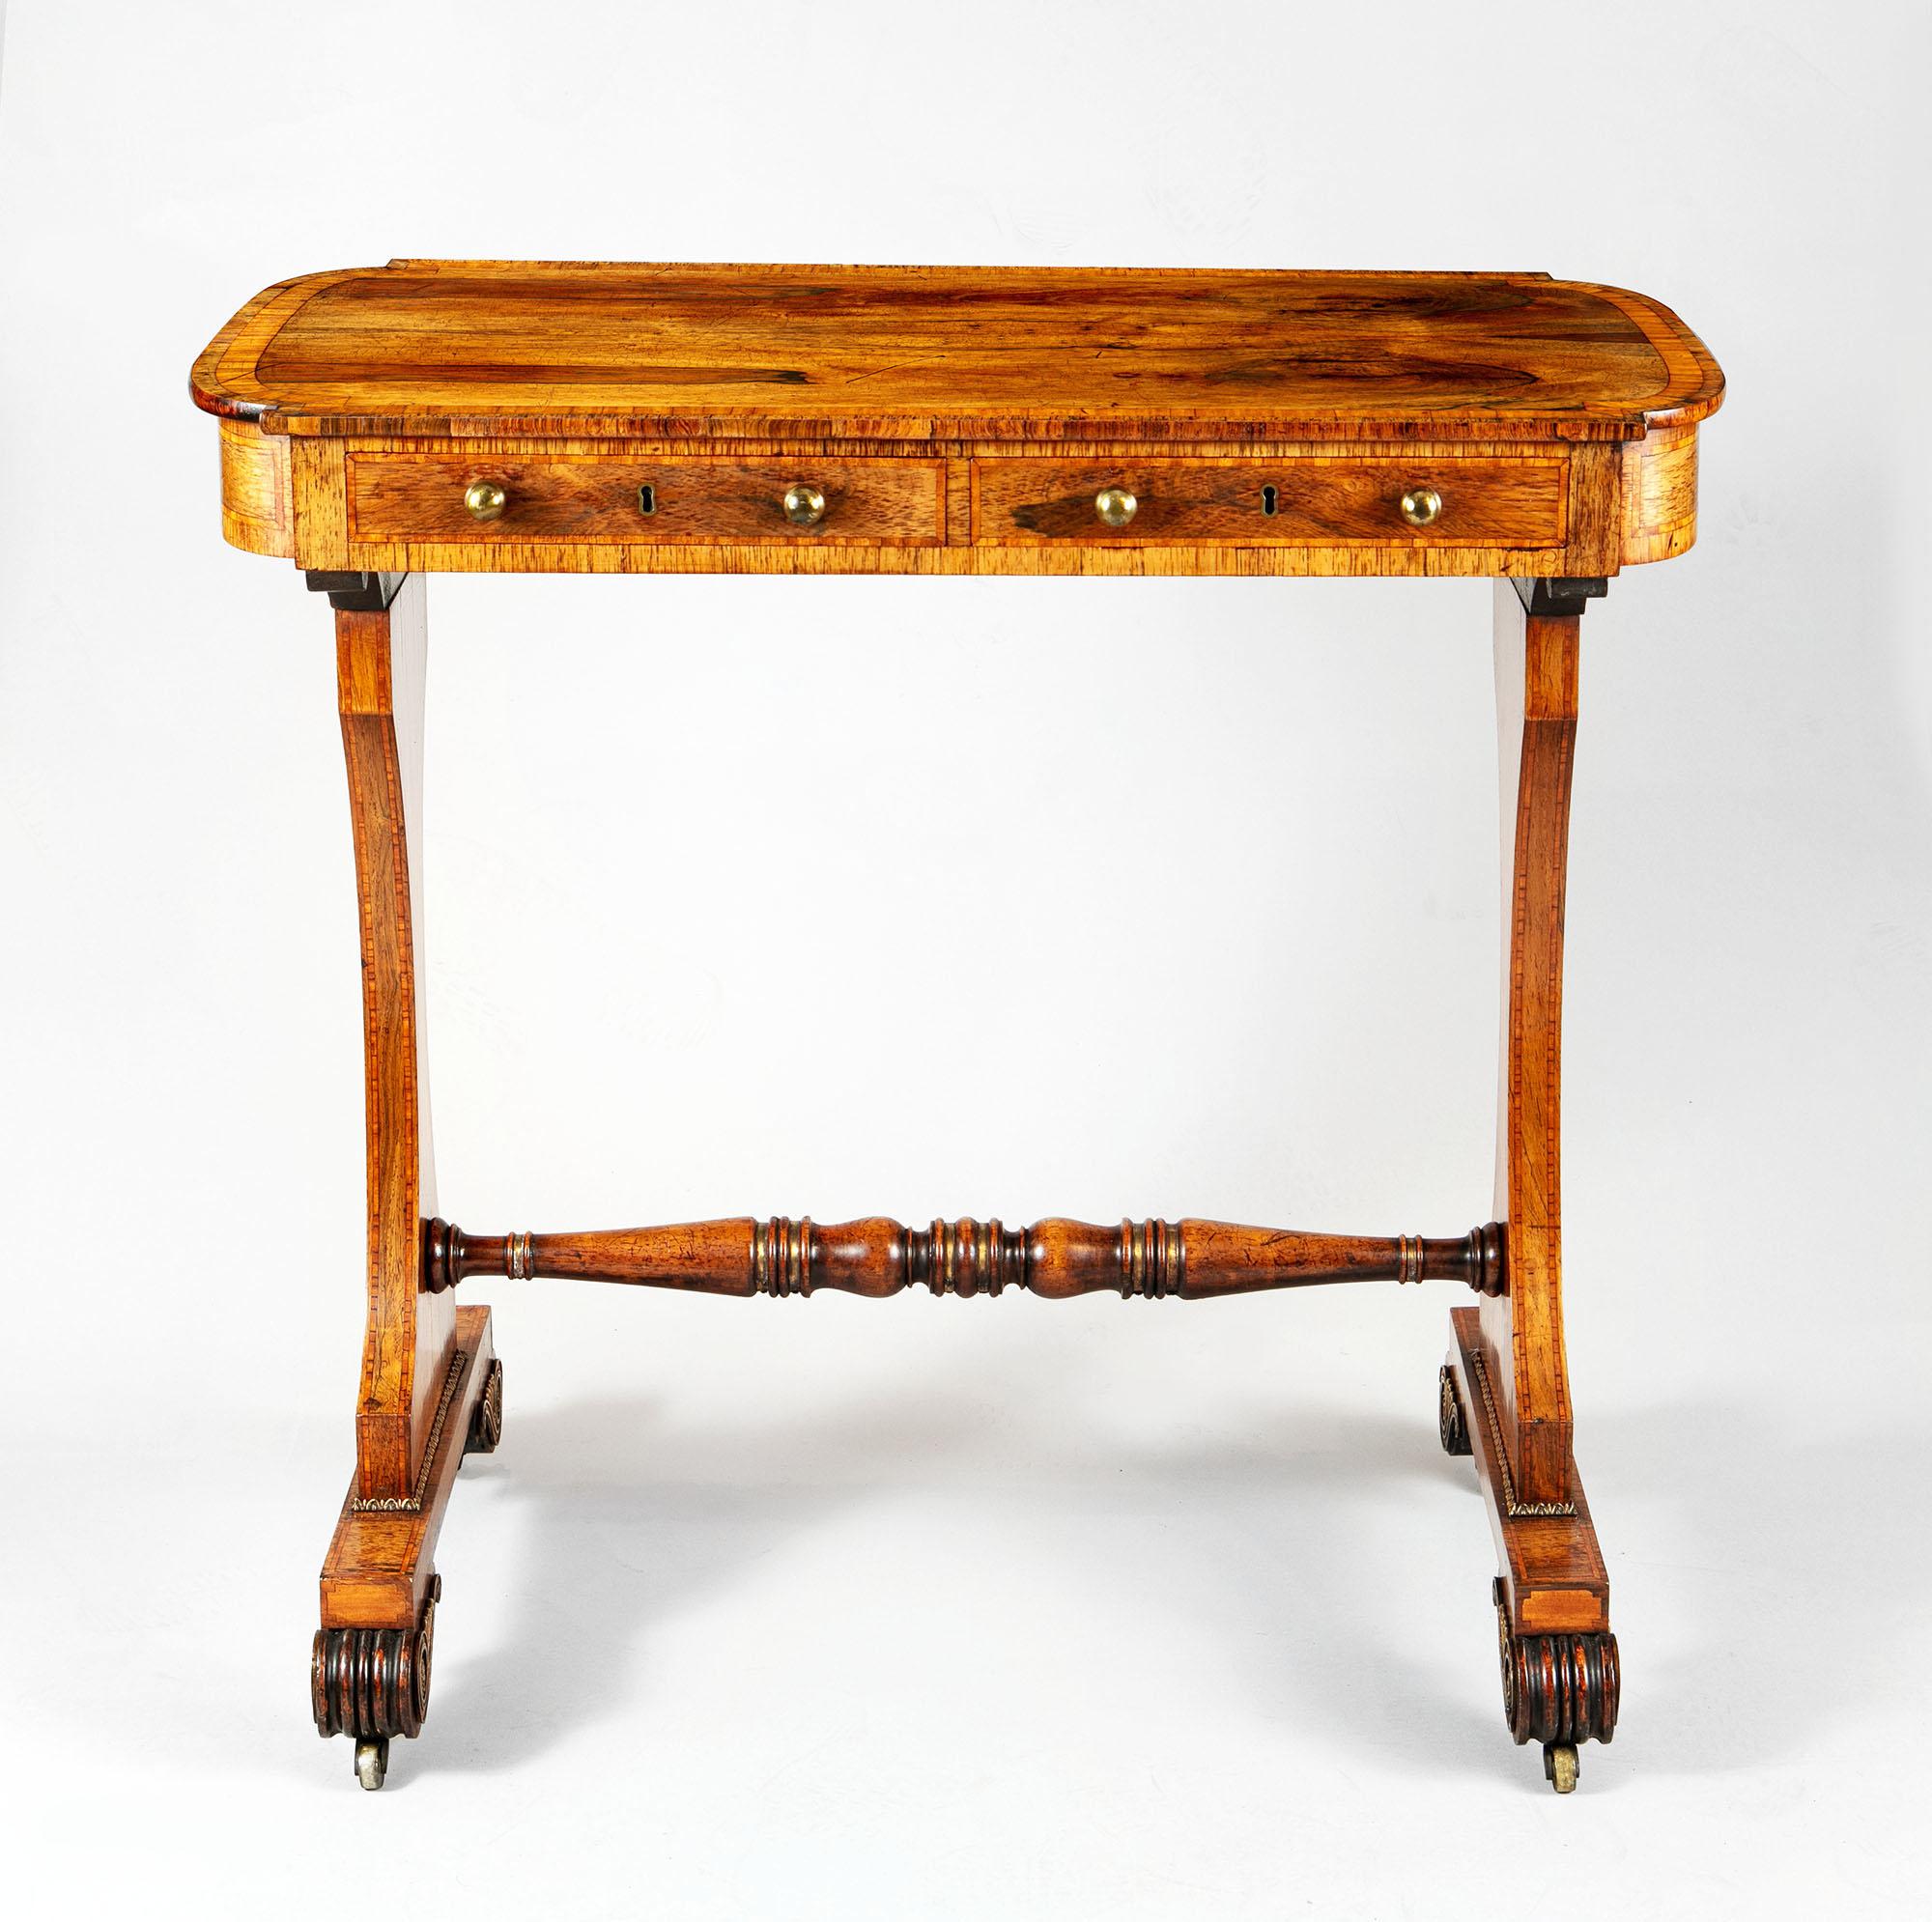 A very fine early 19th-century Regency writing table of small scale attributed to the workshop of George Oakley. The fine top with D curved ends houses two short drawers in rosewood with banding and brass ball handles, the whole raised on pedestal